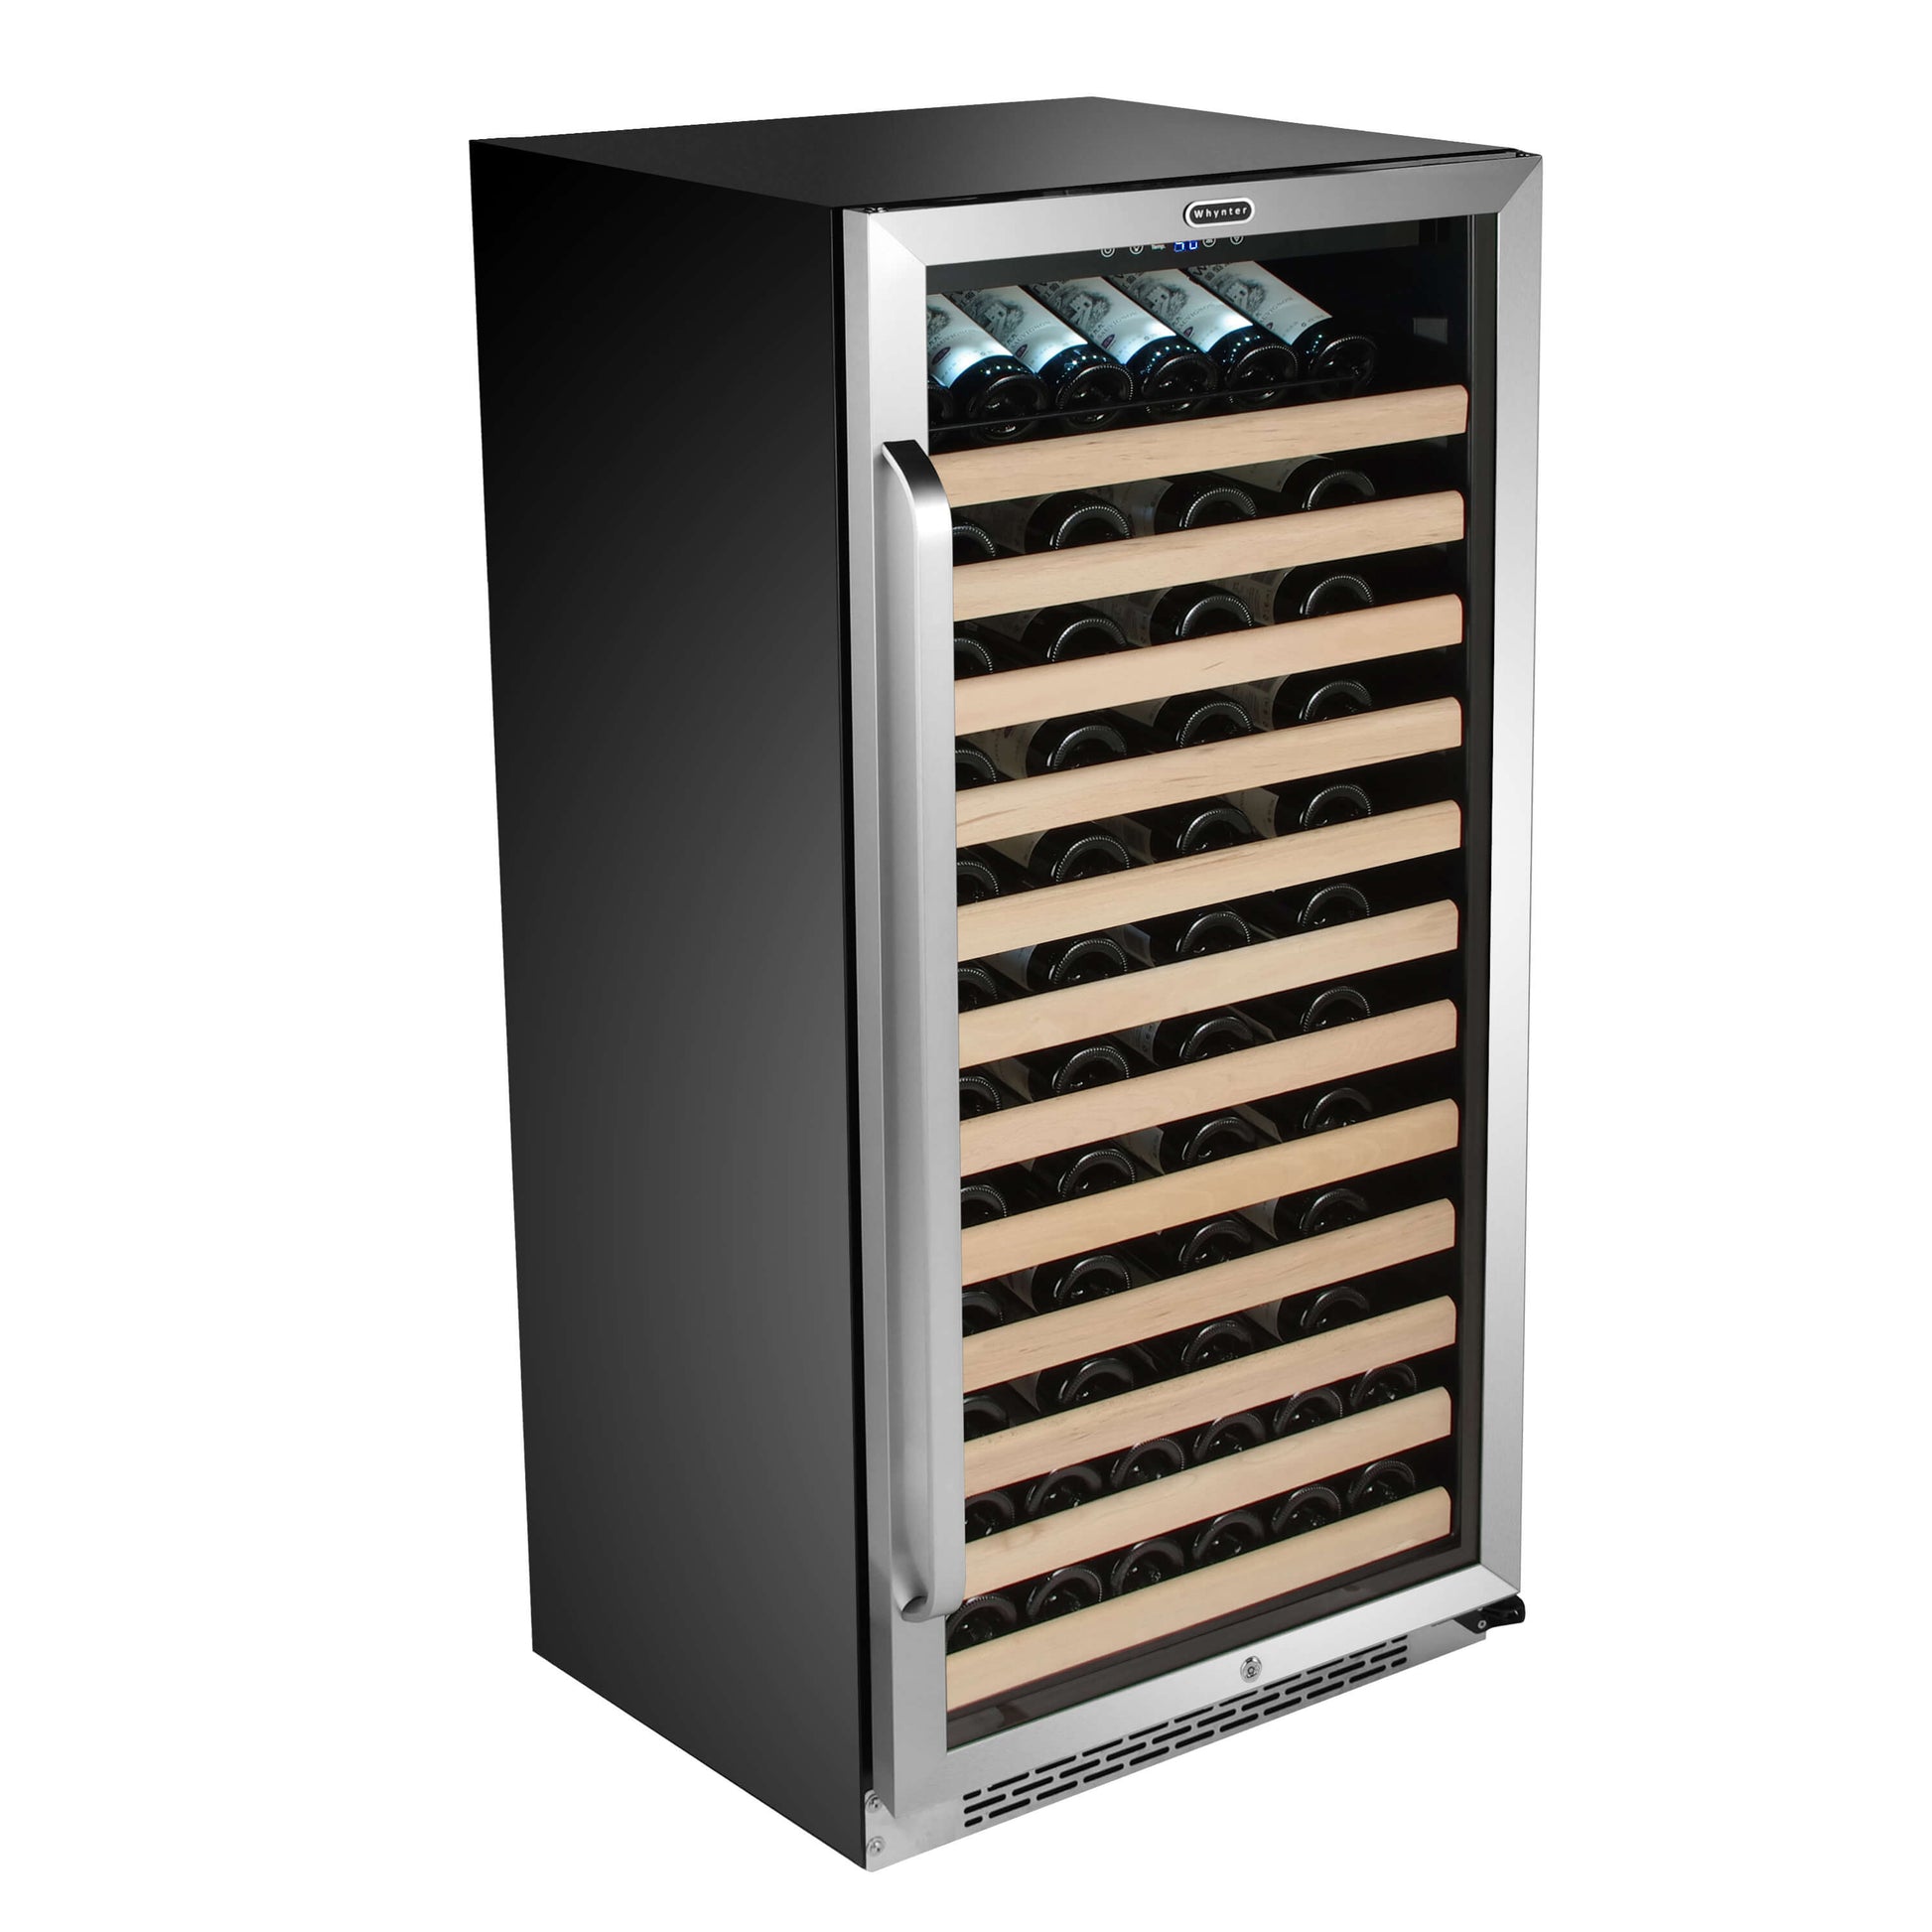 Whynter BWR-1002SD/BWR-1002SDa 100 Bottle Built-in Stainless Steel Compressor Wine Refrigerator with Display Rack and LED display